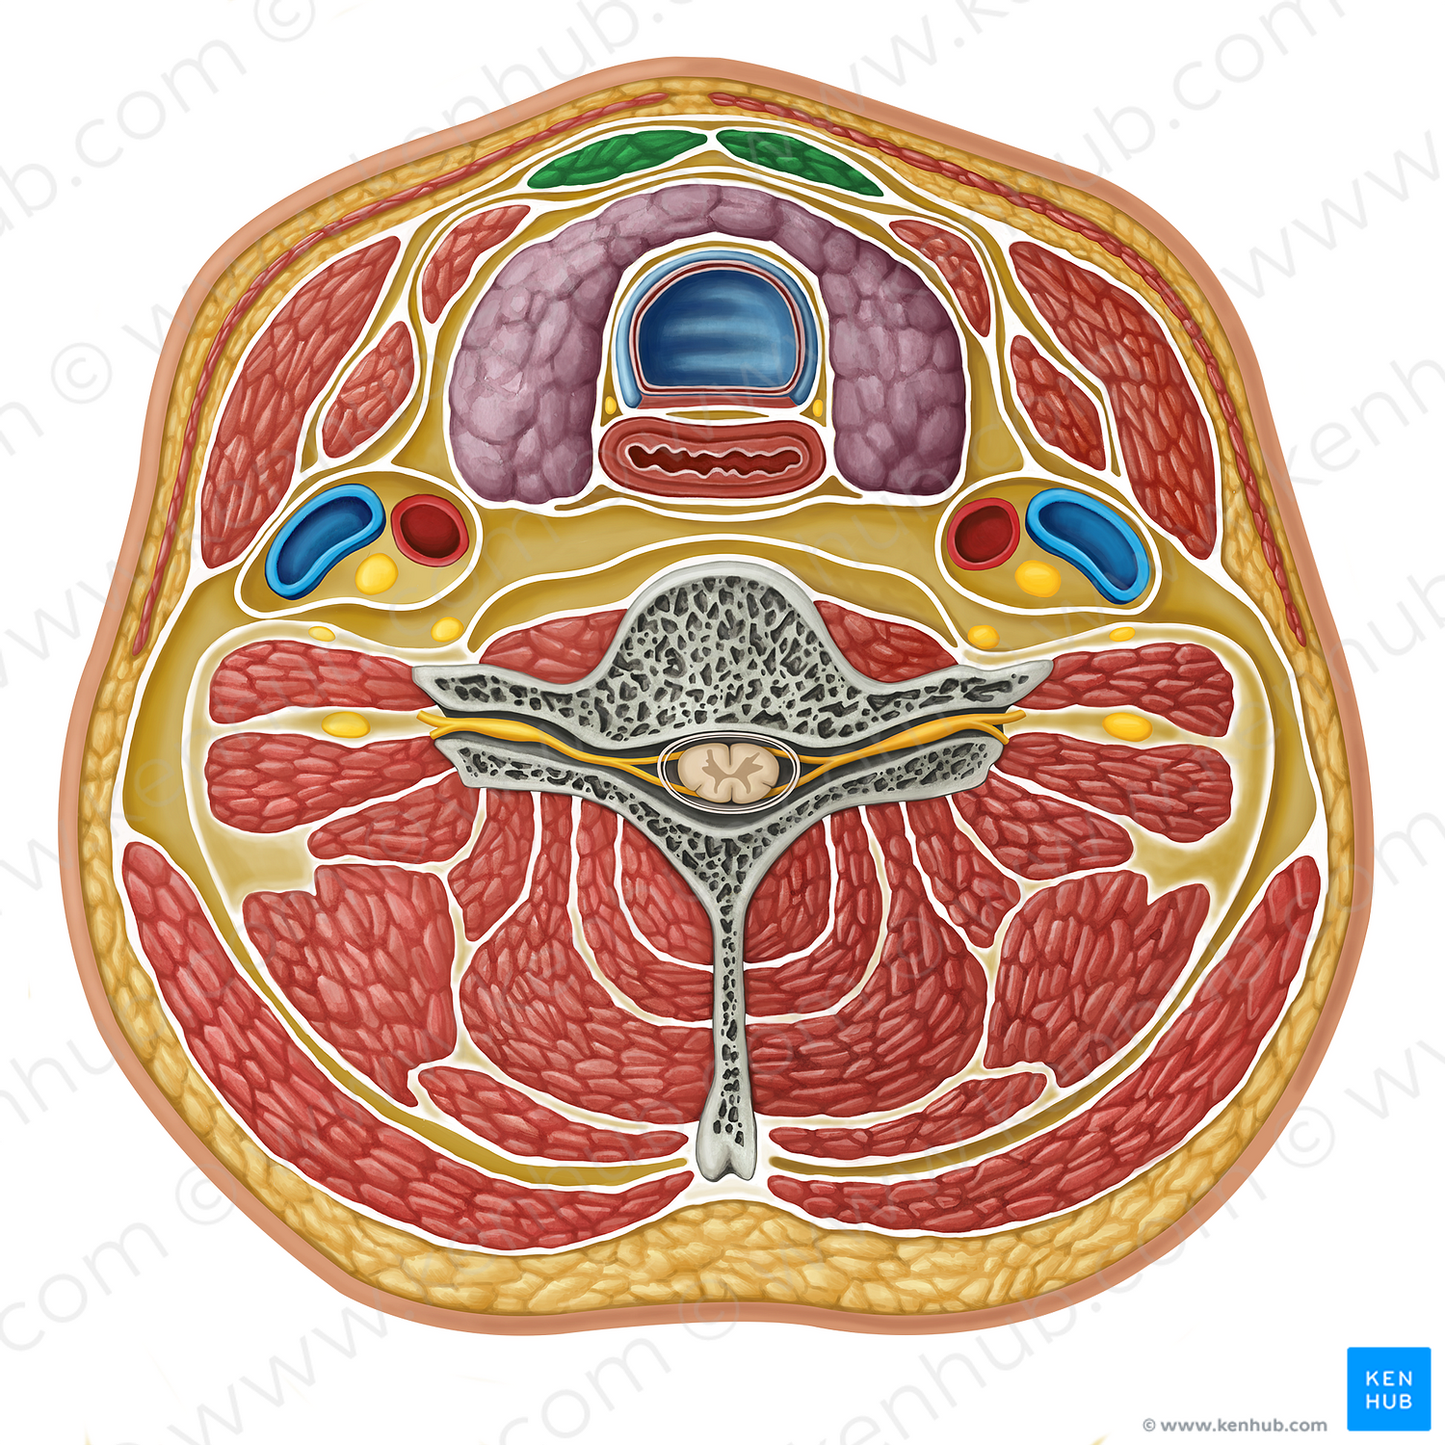 Sternohyoid muscle (#17305)